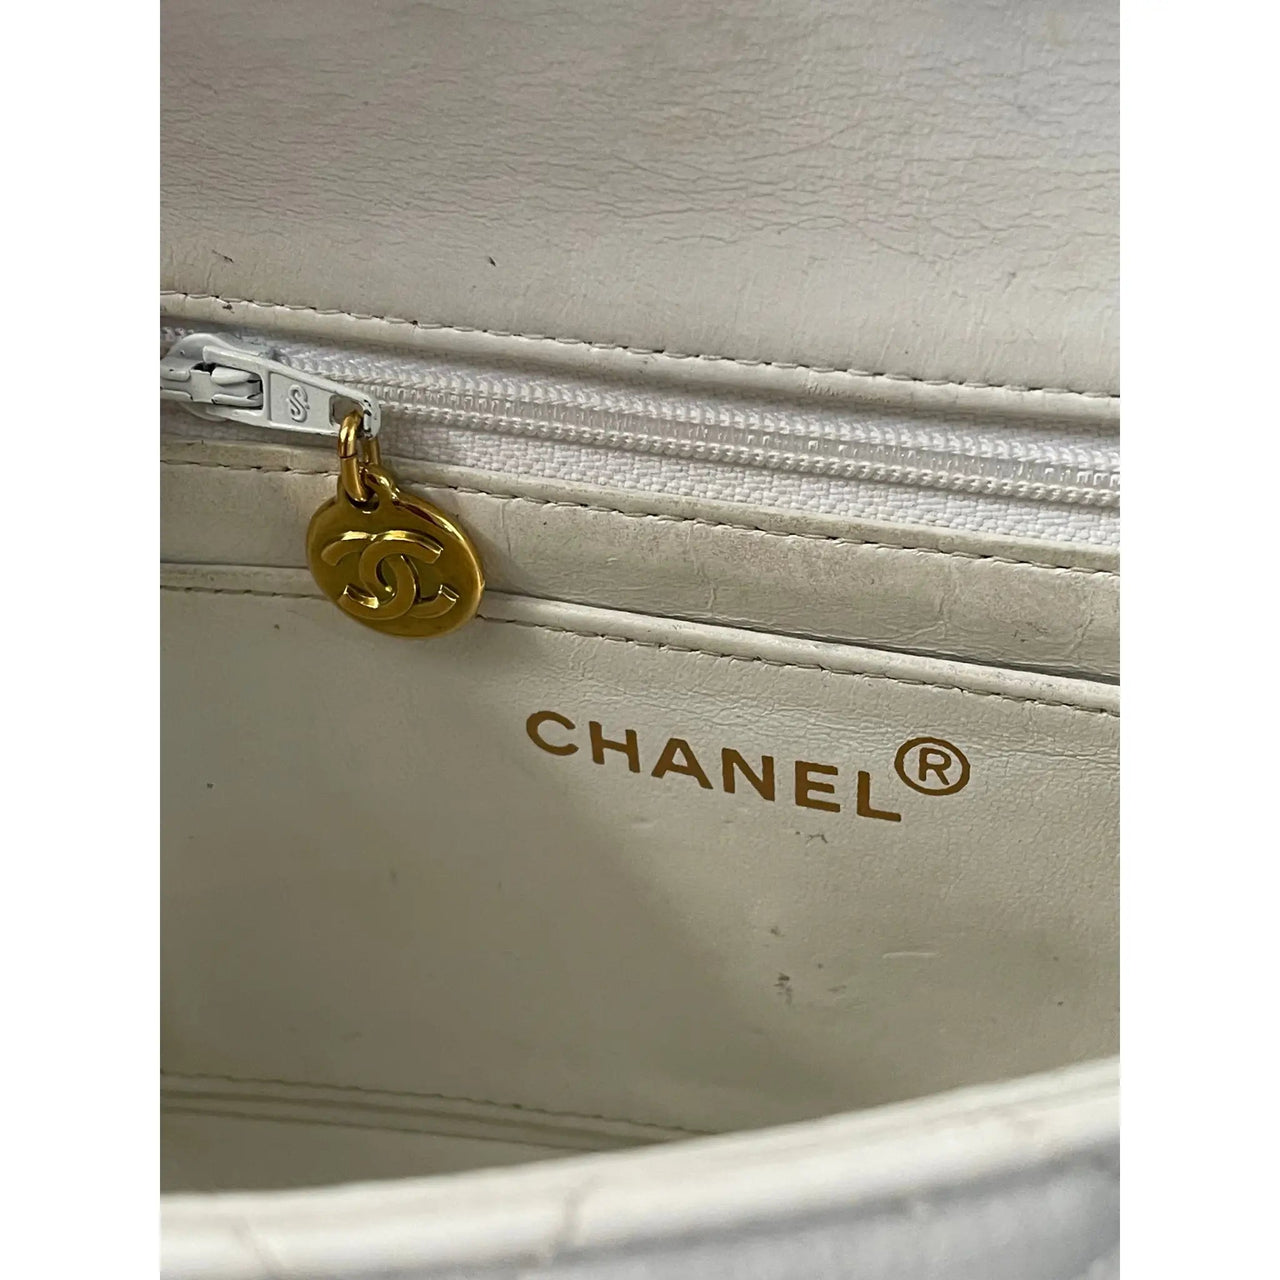 CHANEL VINTAGE MINI GOLD SILVER QUILTED KELLY BAG